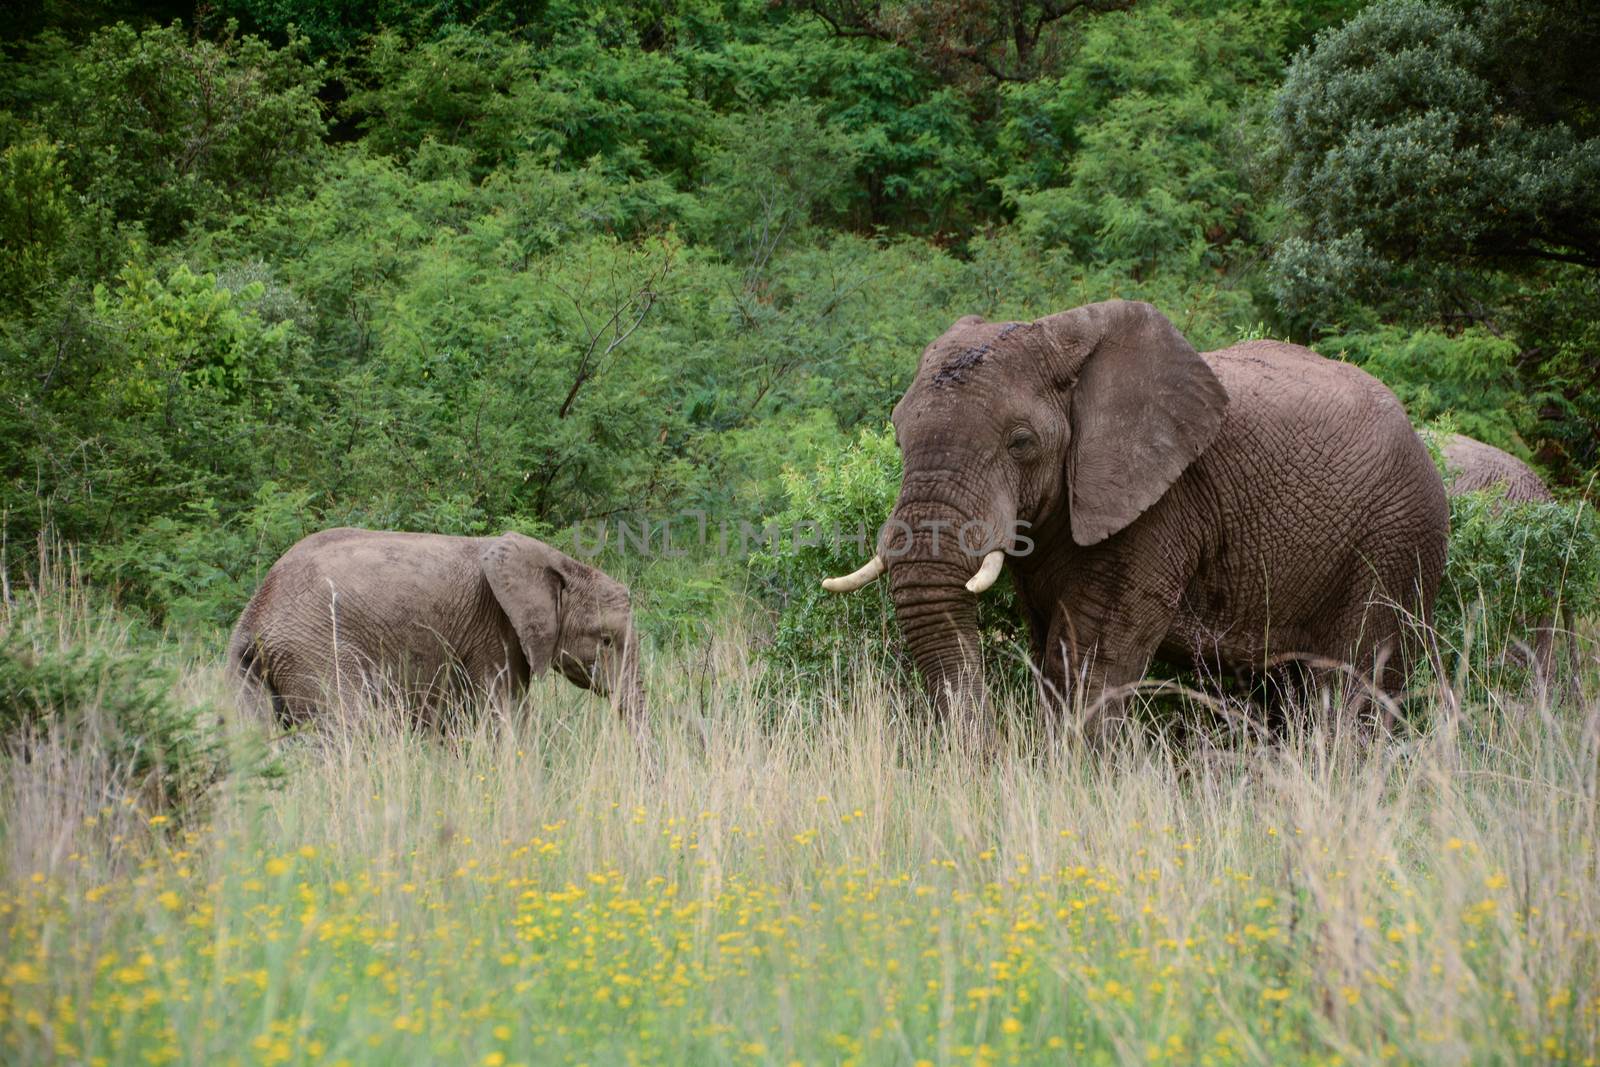 Adult elephant and a child, browsing and eating